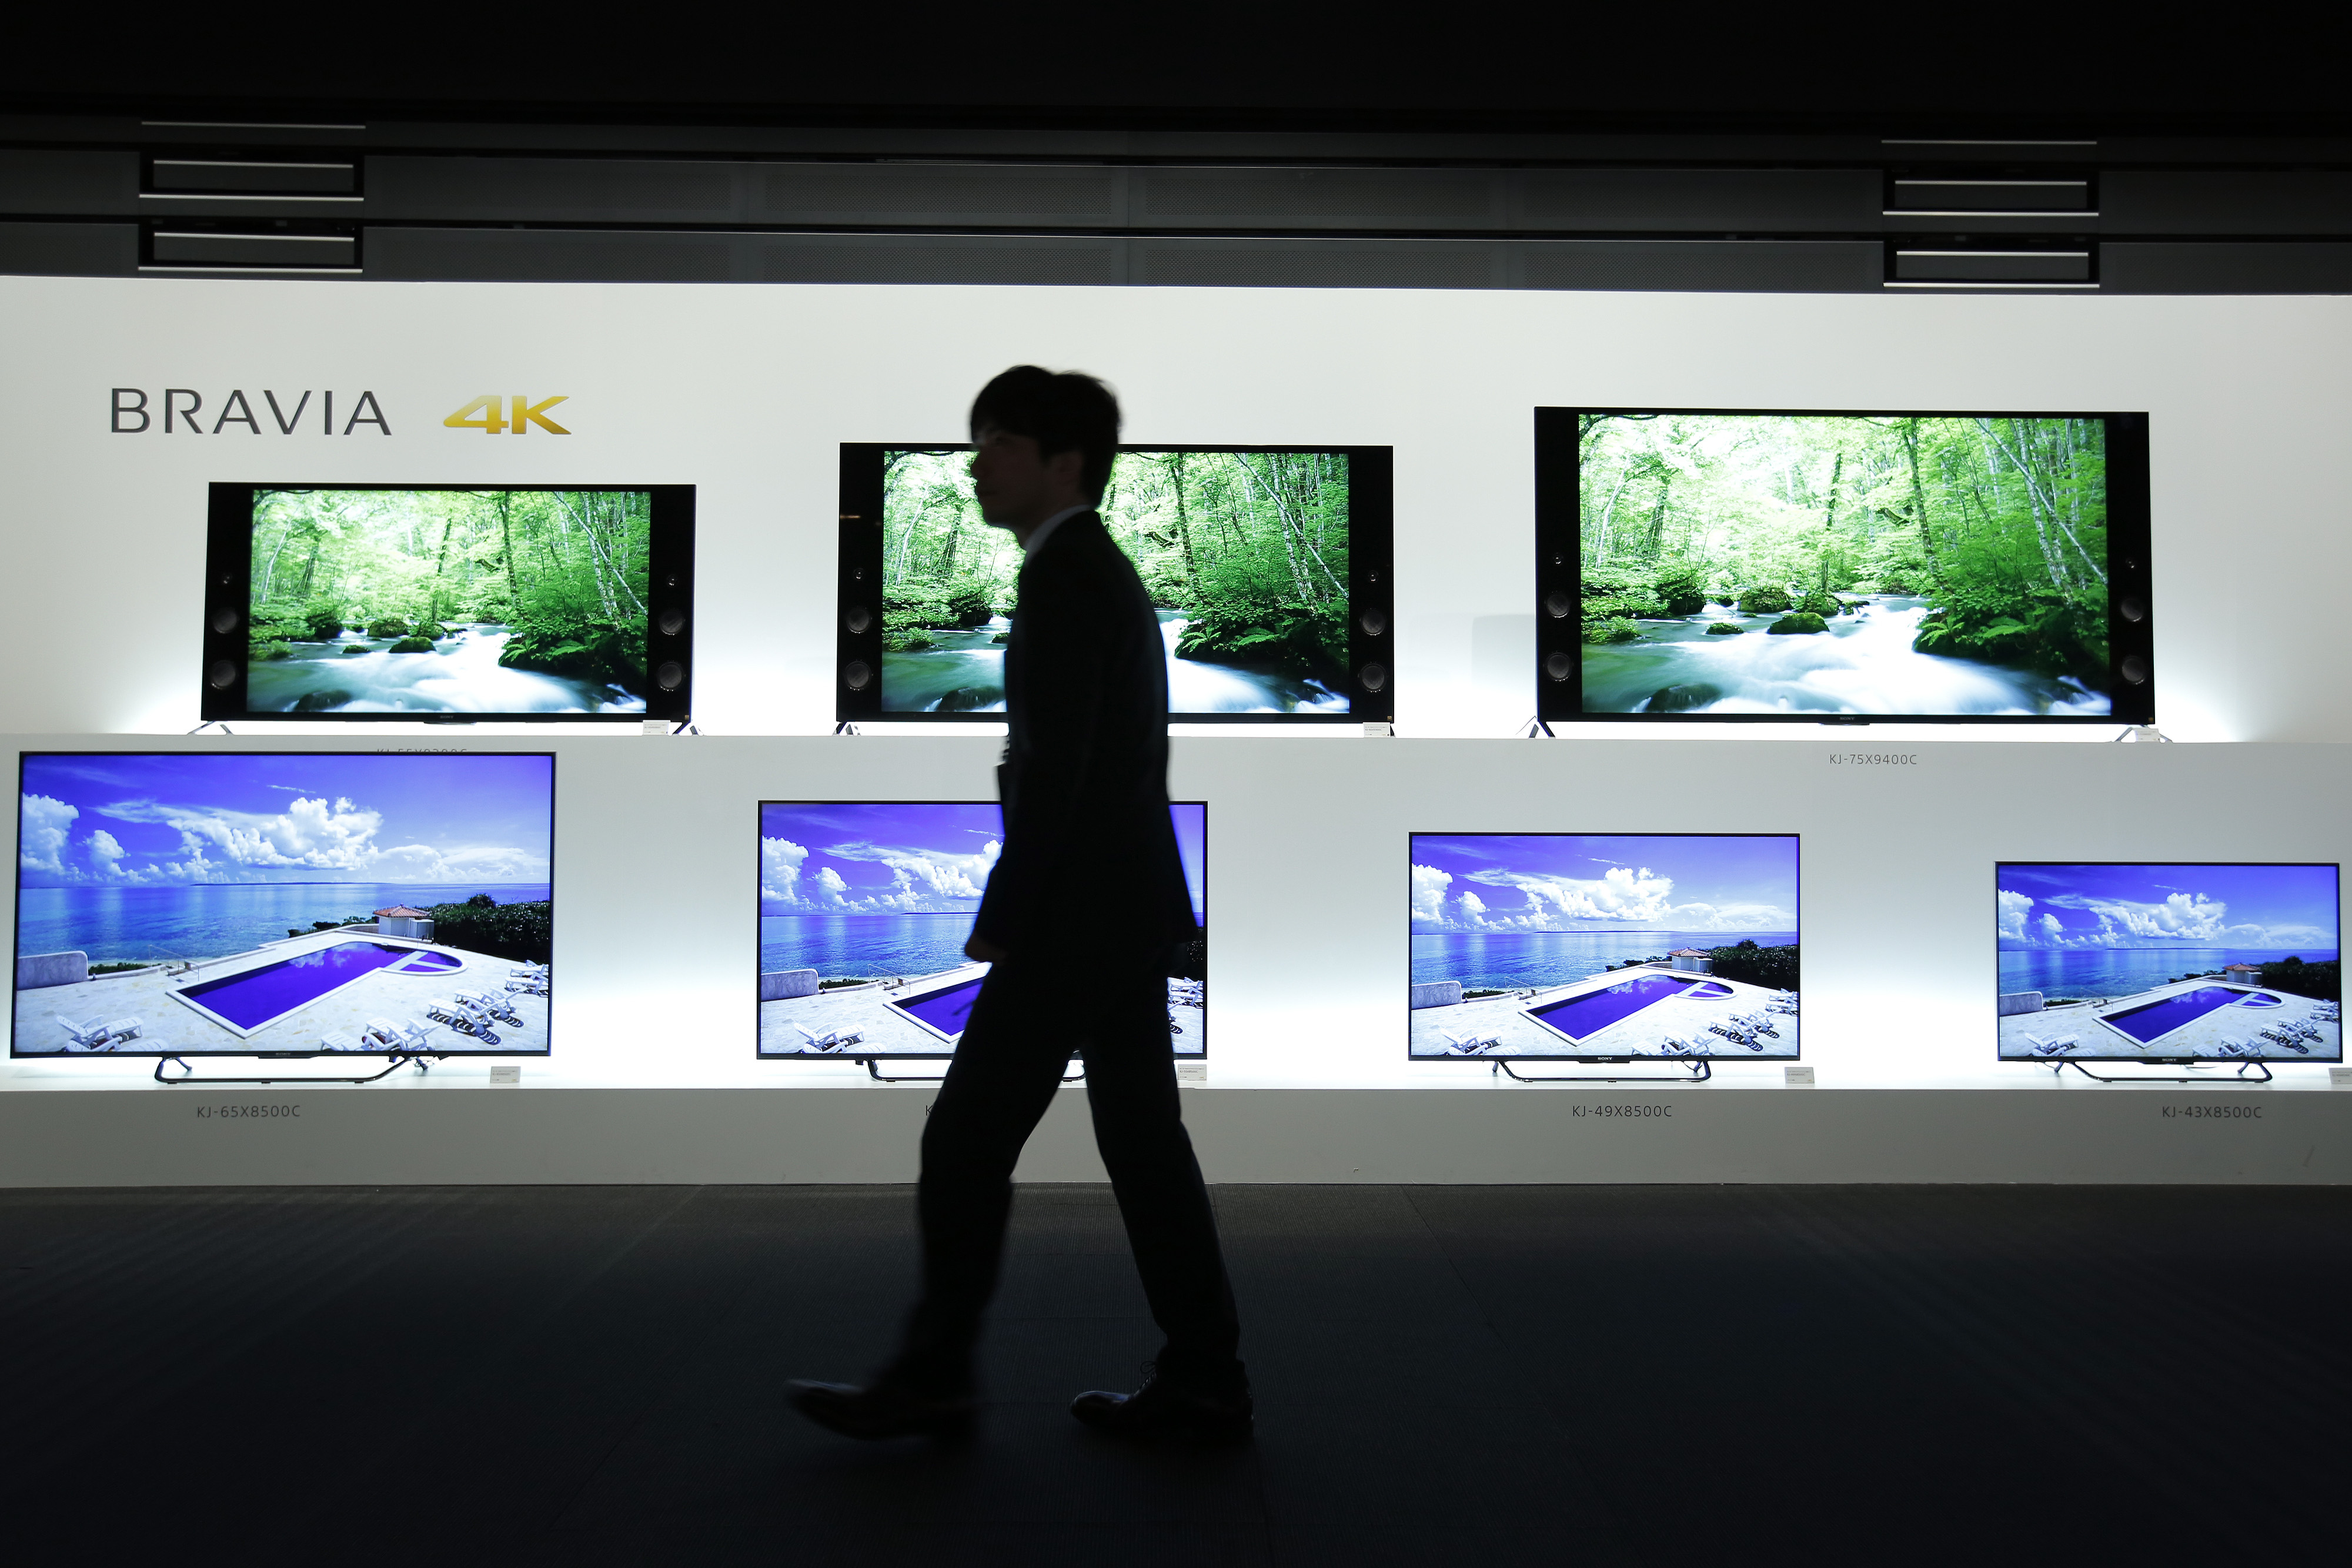 An attendant walks past Sony Corp. Bravia 4K liquid crystal display (LCD) televisions displayed at a launch event in Tokyo, Japan, on Wednesday, May 13, 2015. (Bloomberg&mdash;Bloomberg via Getty Images)